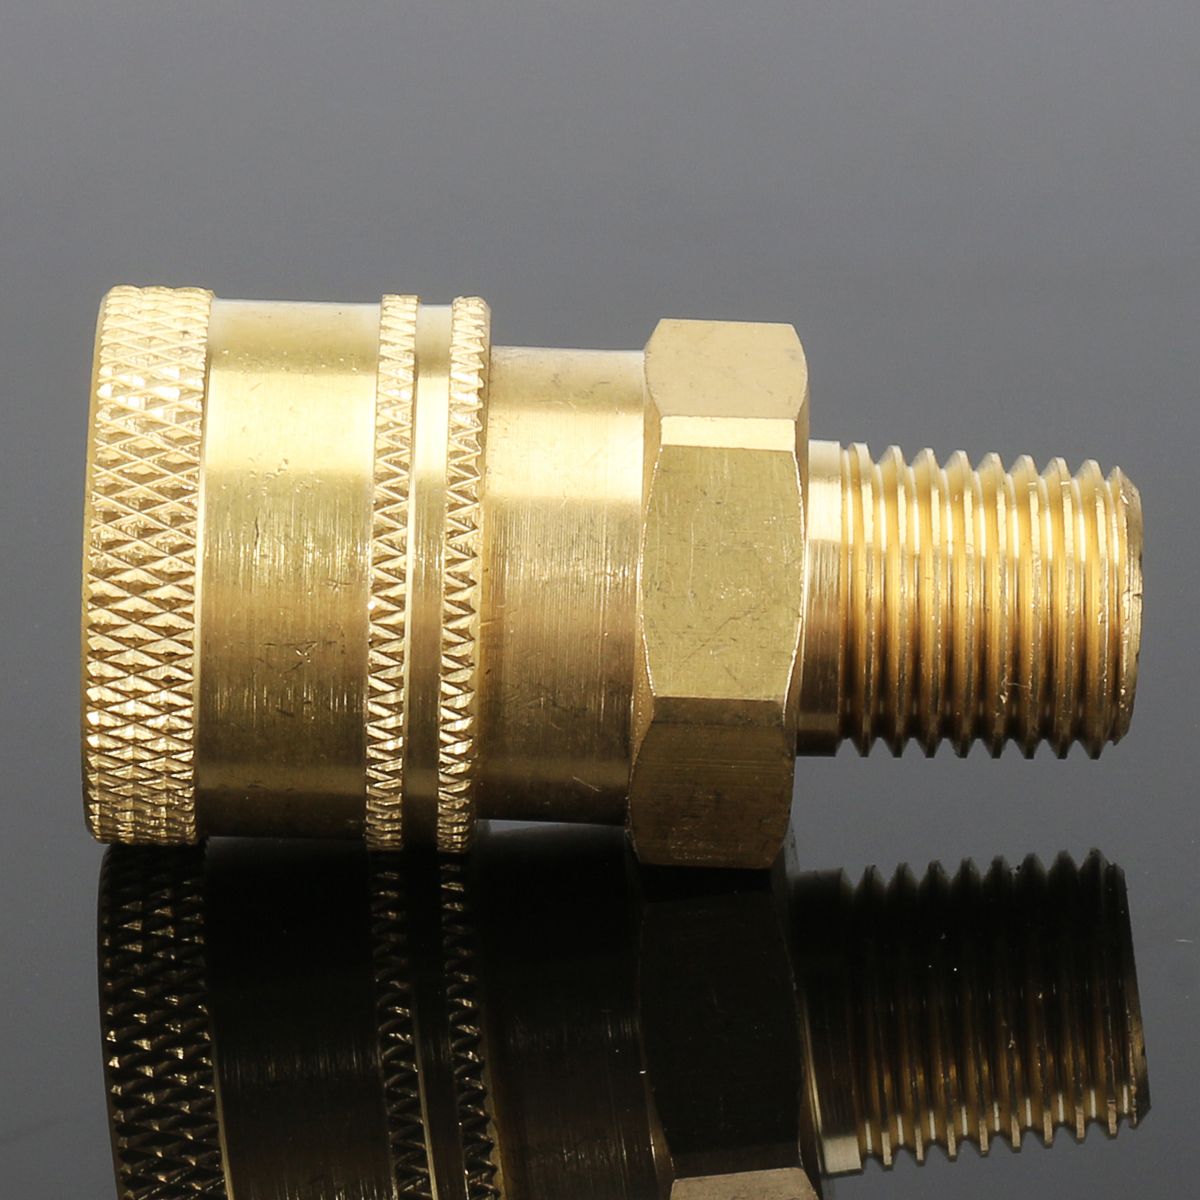 14-Inch-Male-NPT-Quick-Coupler-Socket-Brass-Pressure-Washer-Coupling-4000PSI-1155775